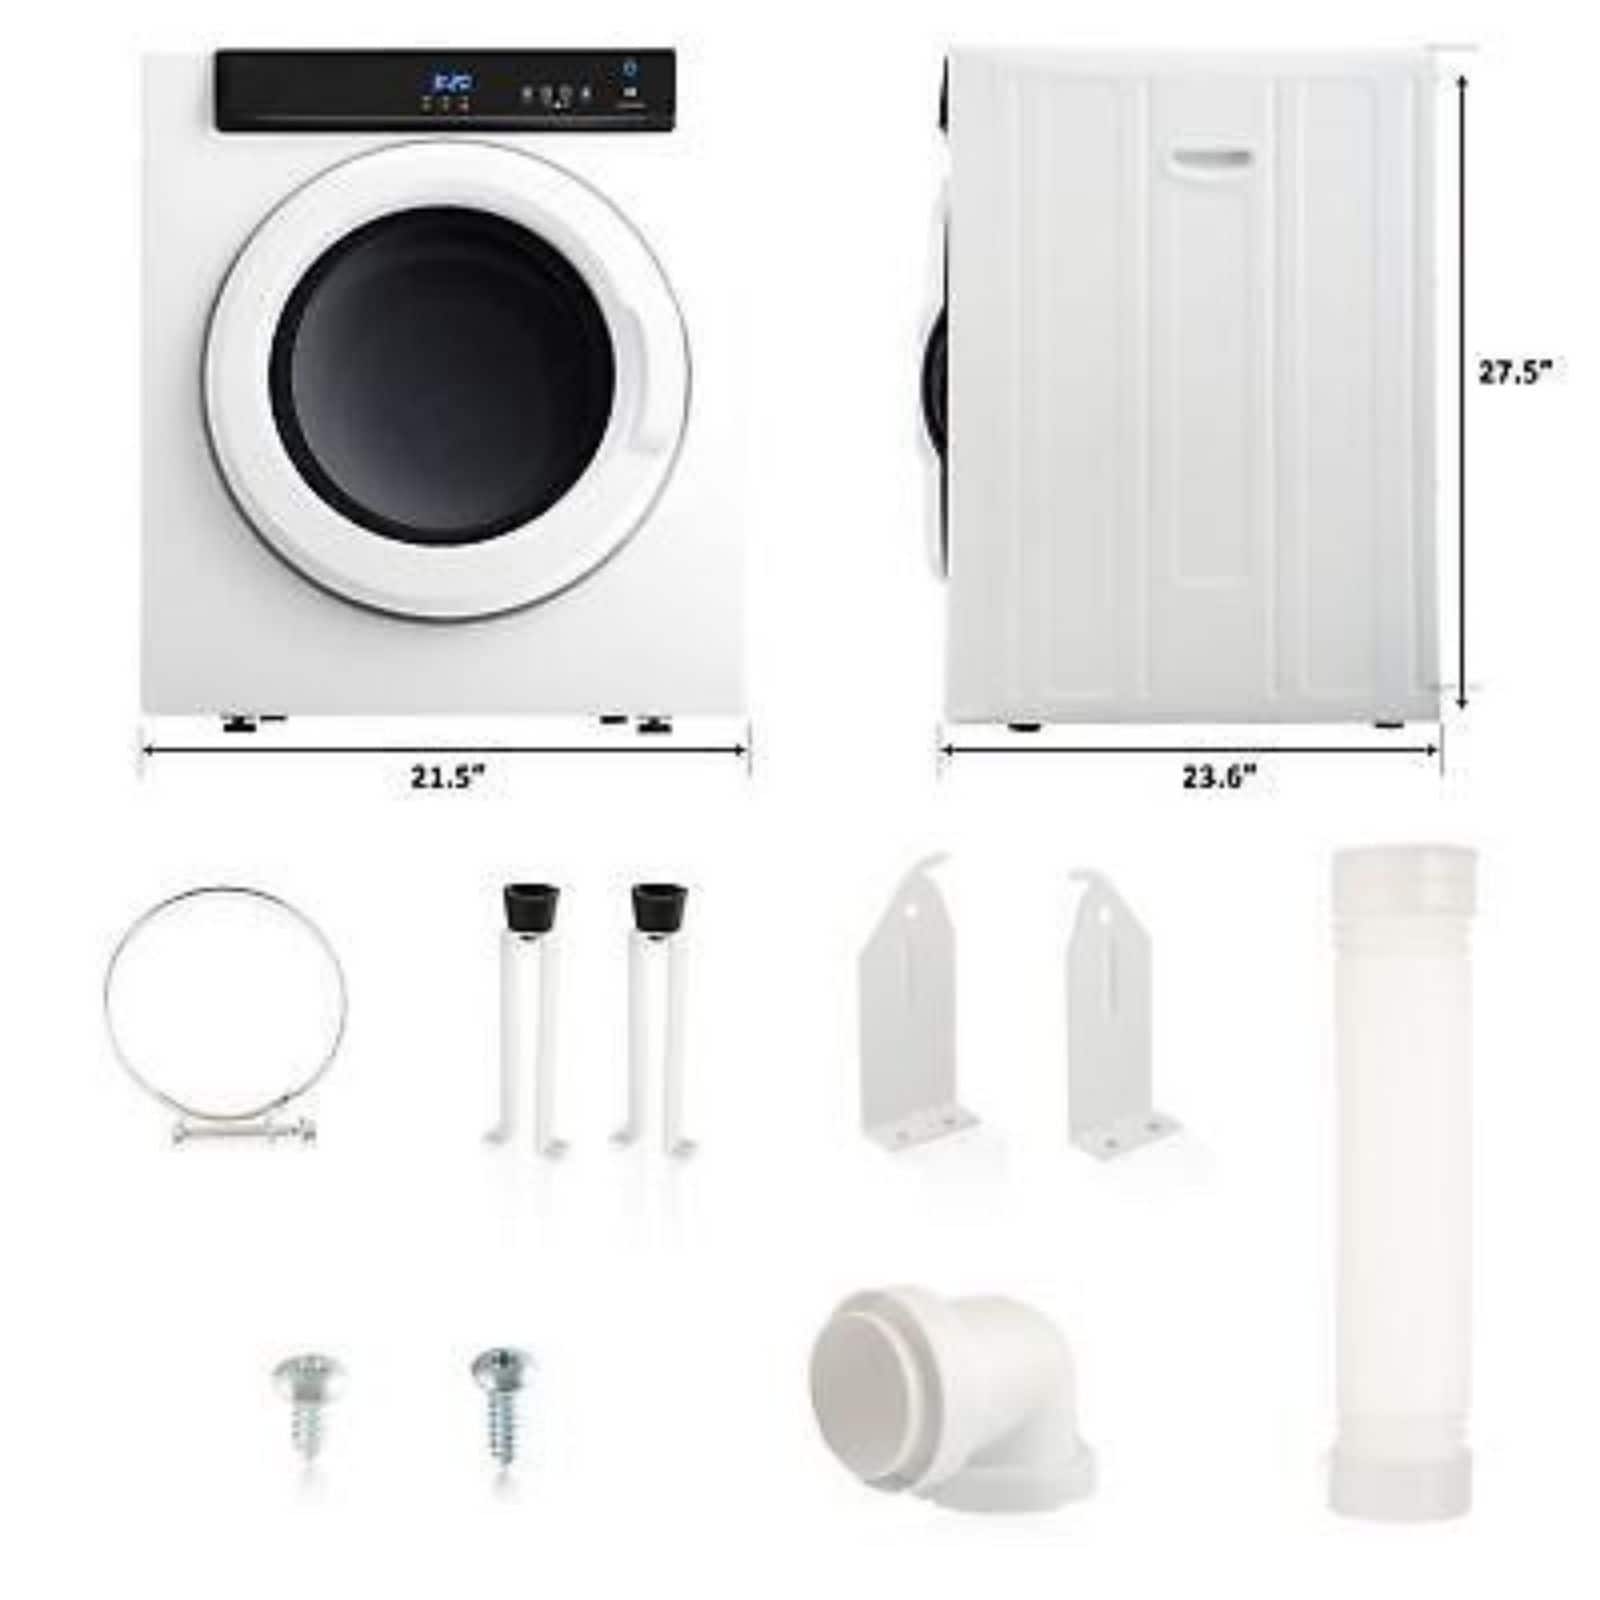 https://ak1.ostkcdn.com/images/products/is/images/direct/0e79348b1934ac4ff8ca0705ac7e468d630144fa/Electric-Portable-Clothes-Dryer%2C-Front-Load-Laundry-Dryer.jpg